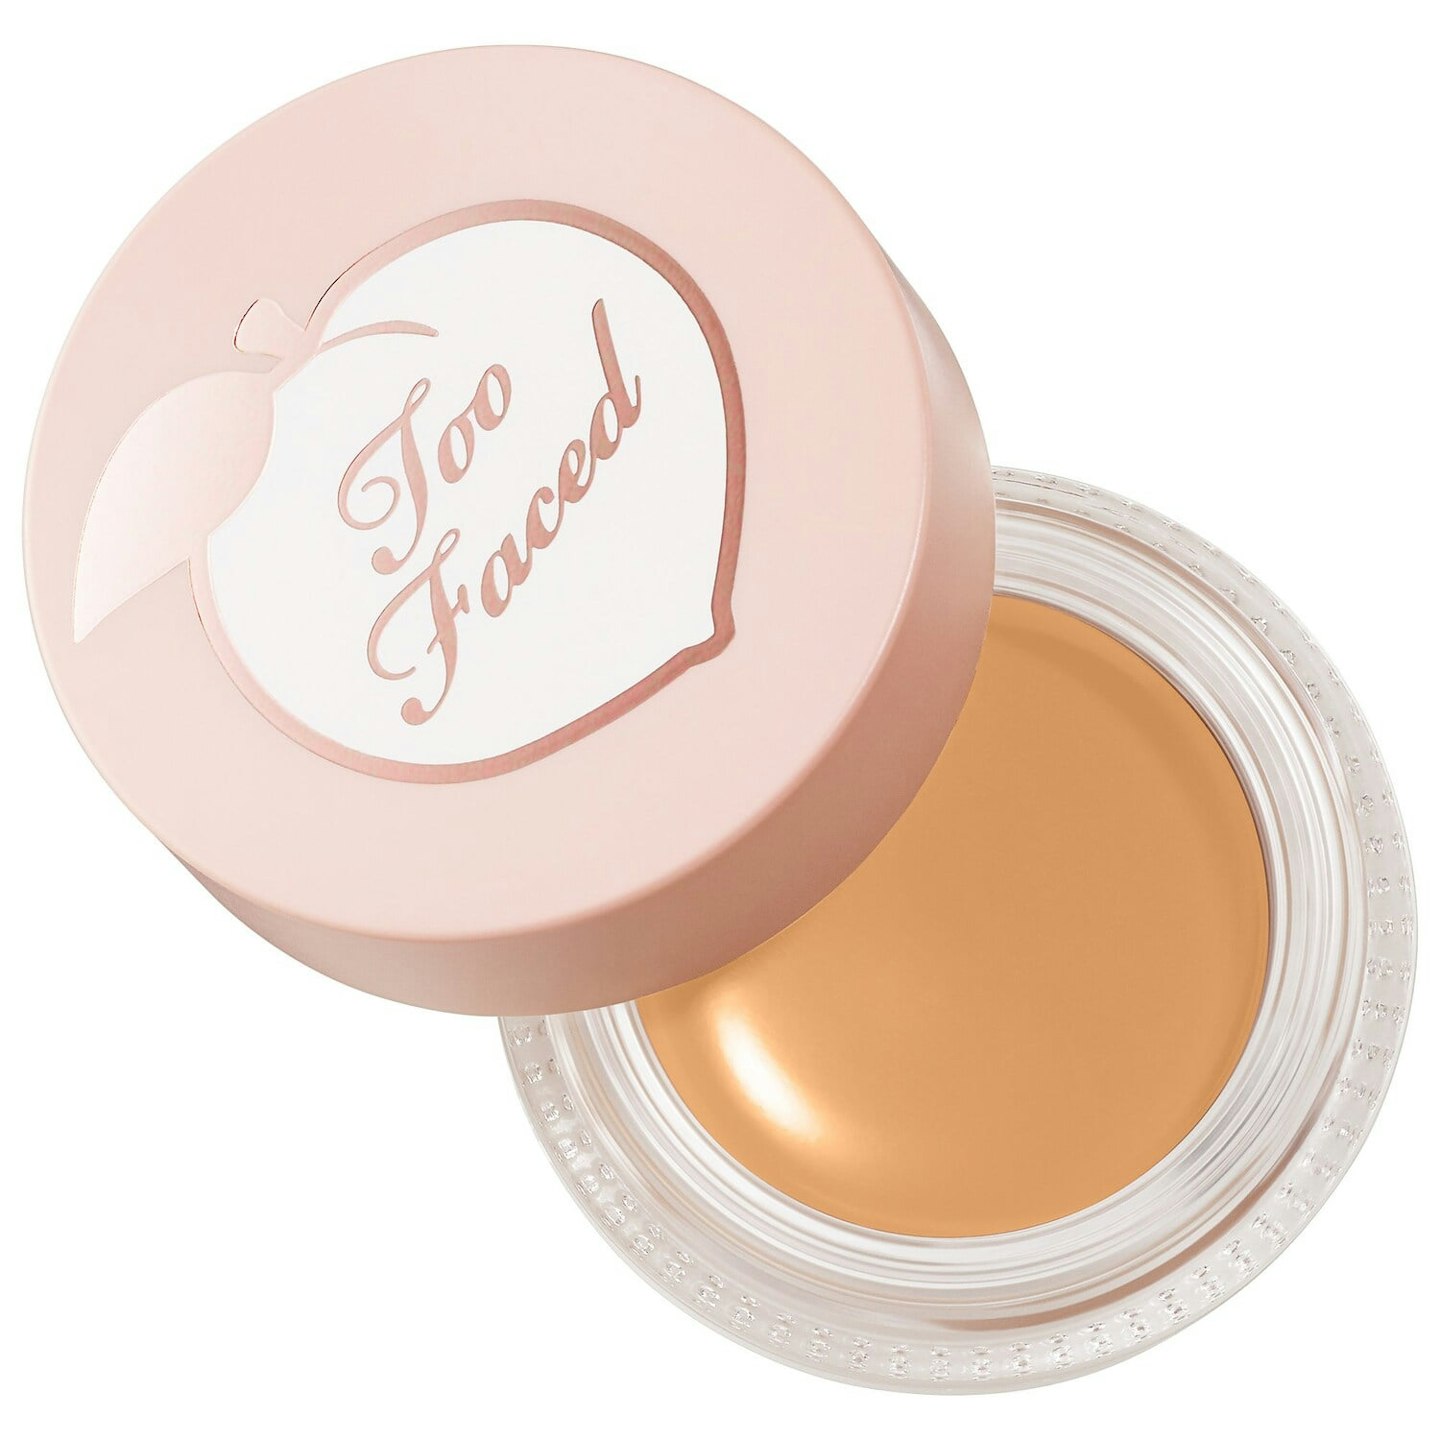 Too Faced Peach Perfect Instant Coverage Concealer, £18.50